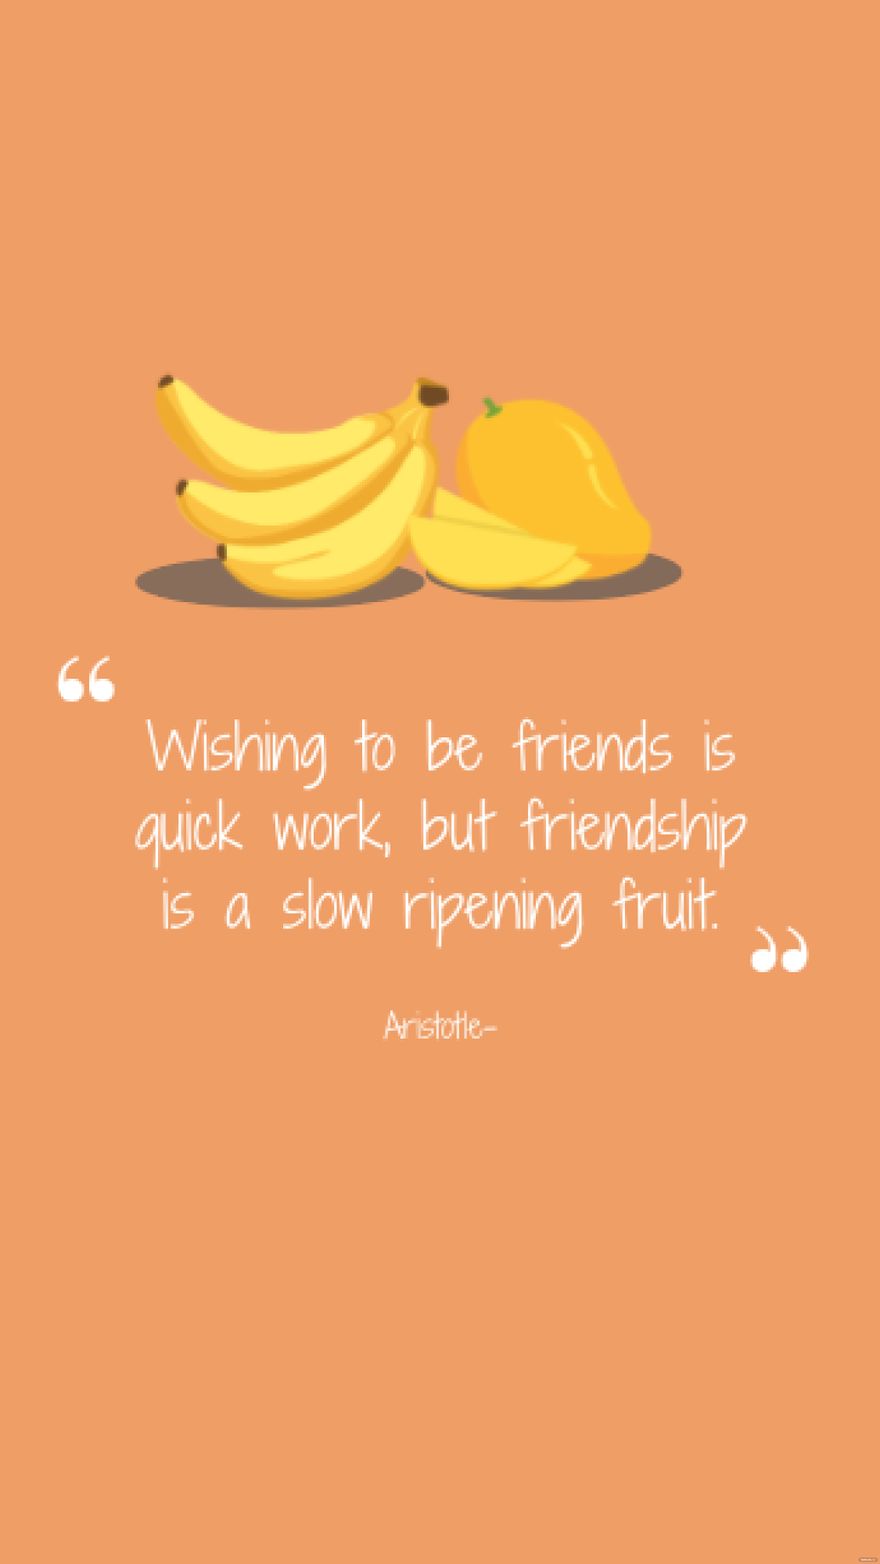 Aristotle- Wishing to be friends is quick work, but friendship is a slow ripening fruit.